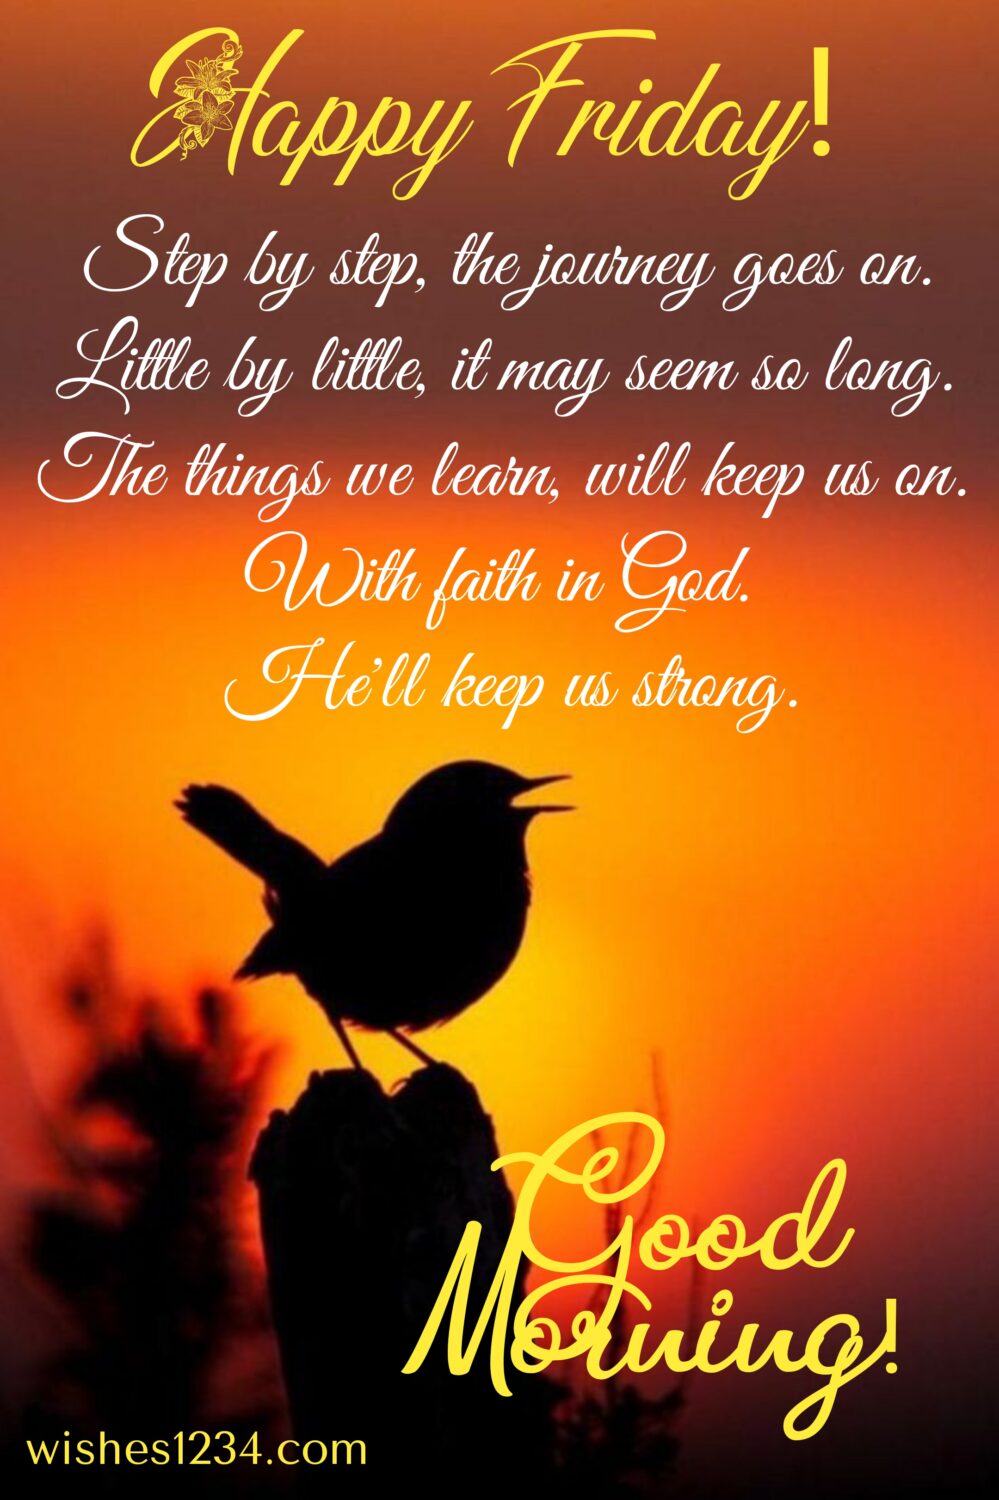 Bird sitting on wood, Quotes about Friday | Friday blessings.